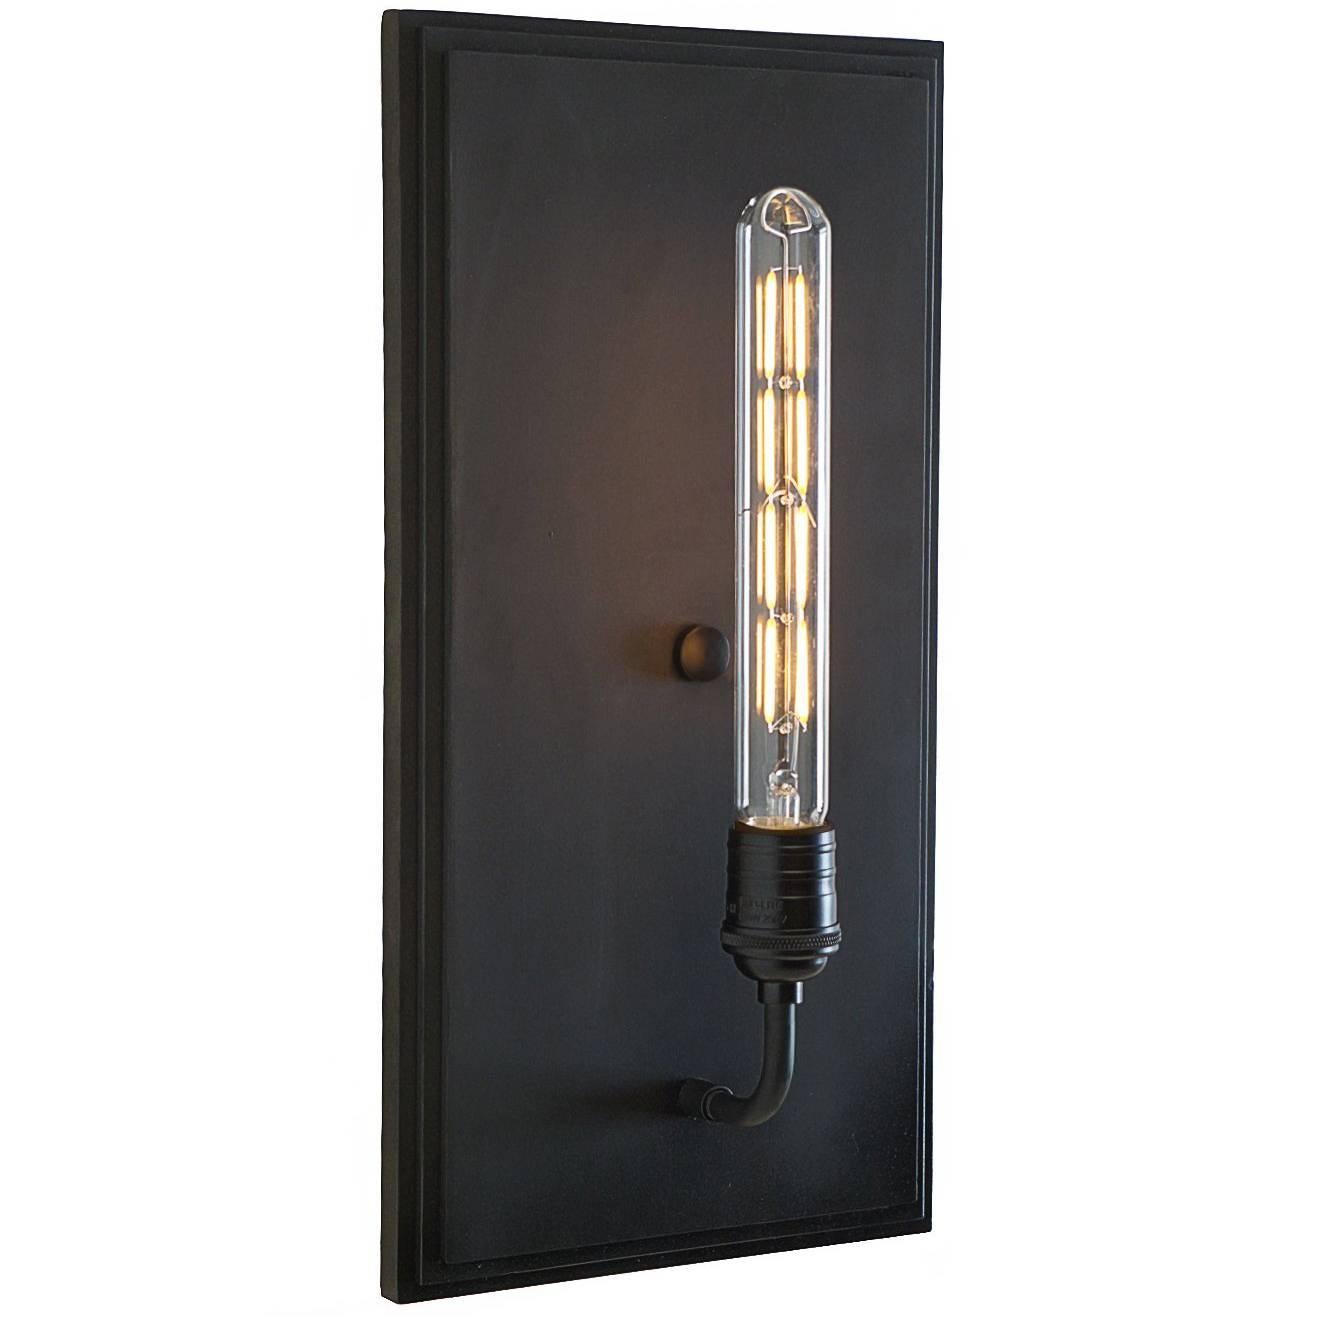 Moderne Art Deco Inspired Contemporary Interior Wall Sconce - Black Matte Finish